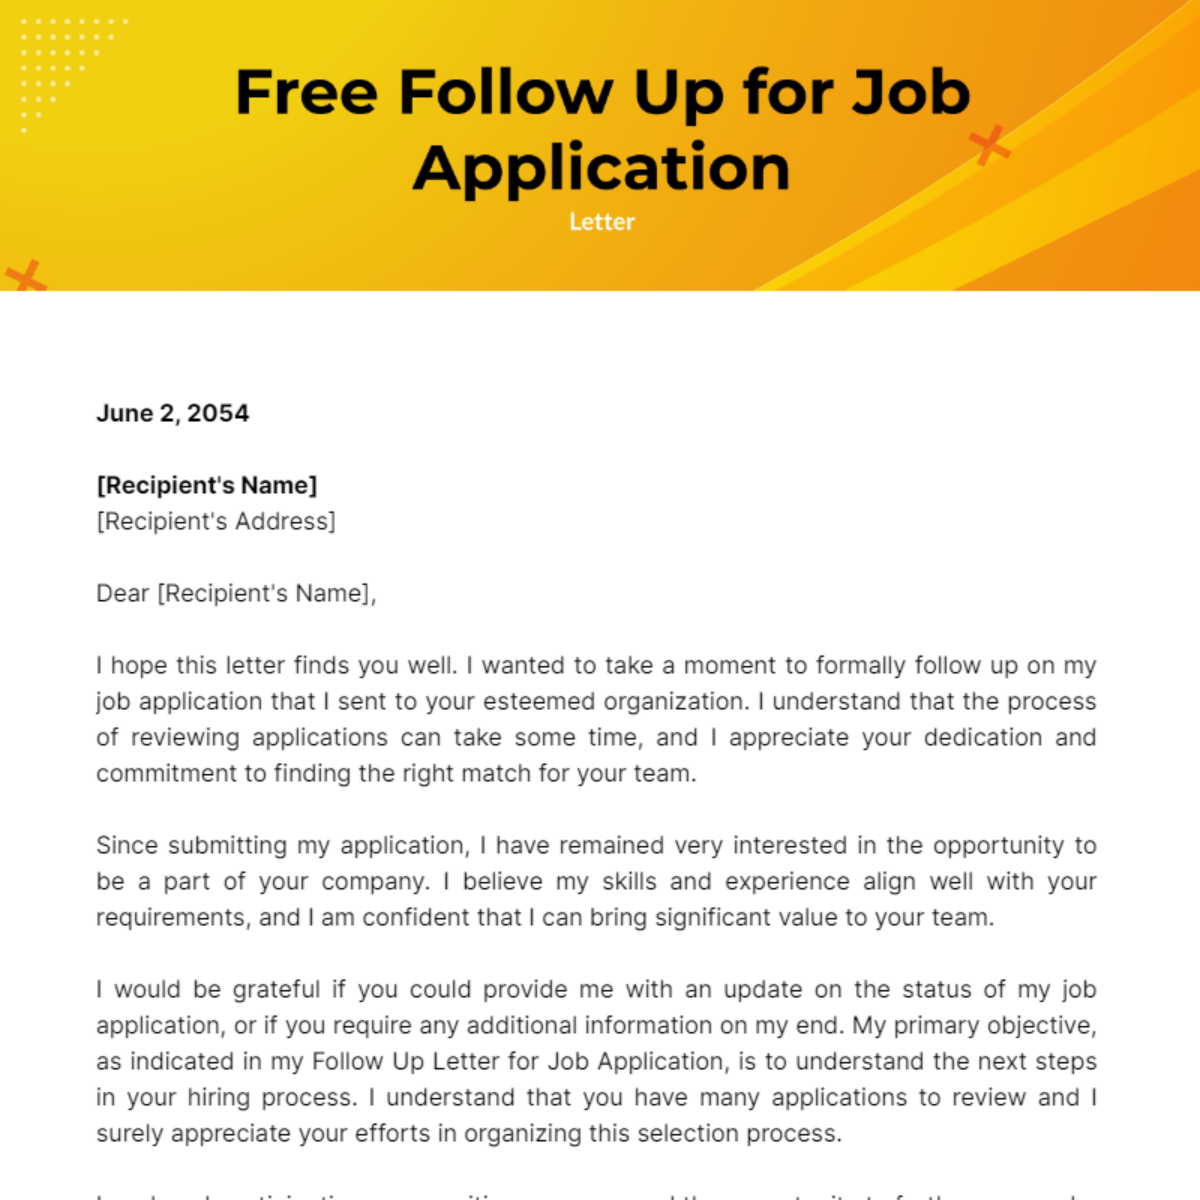 Follow Up Letter for Job Application Template